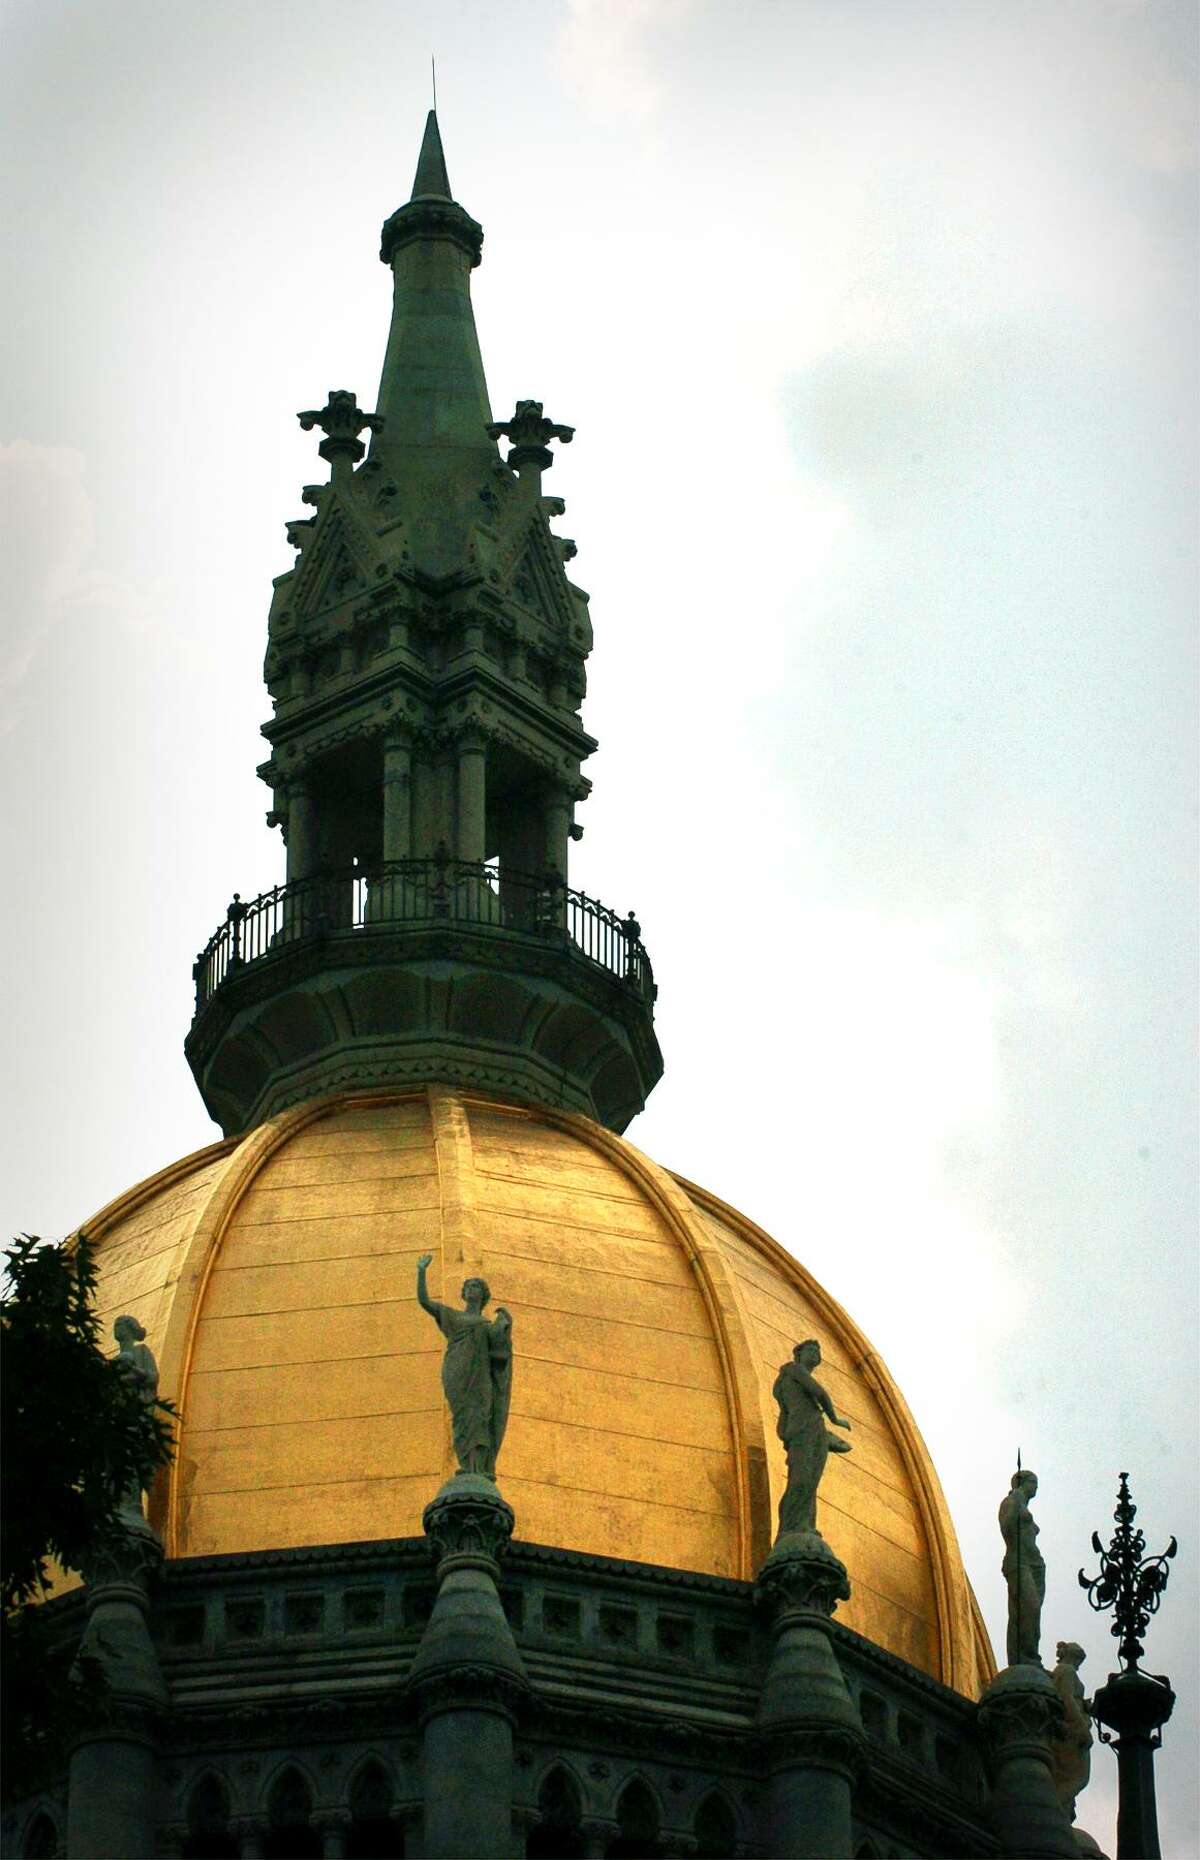 The Connecticut State Capitol dome in Hartford.